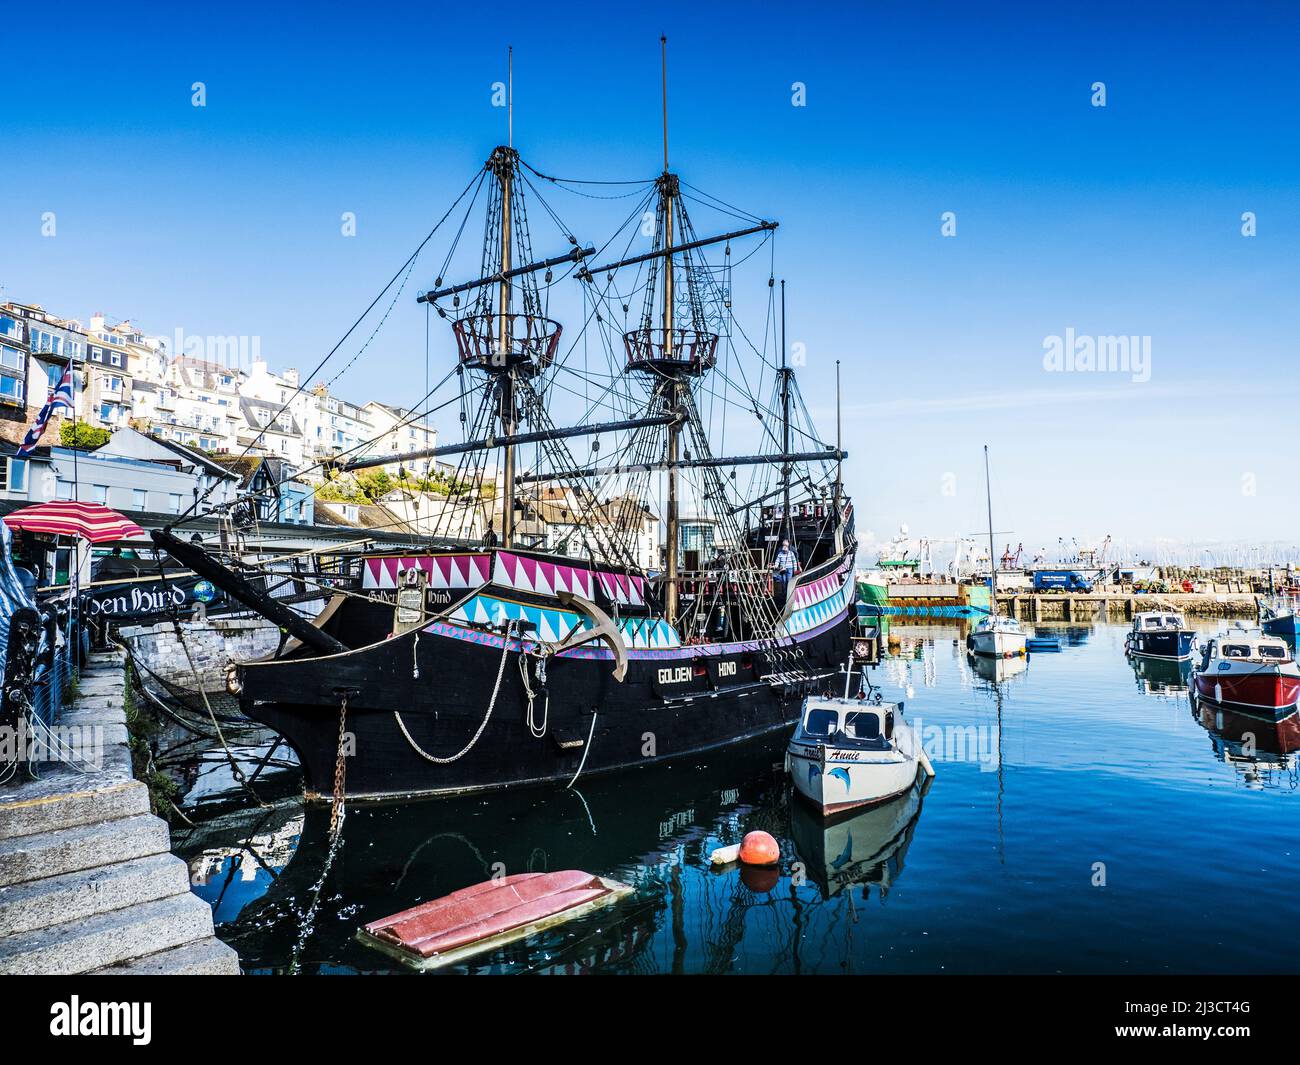 The full sized replica of The Golden Hind, Sir Francis Drake's famous galleon, which is permanently moored in Brixham harbour, Devon. Stock Photo